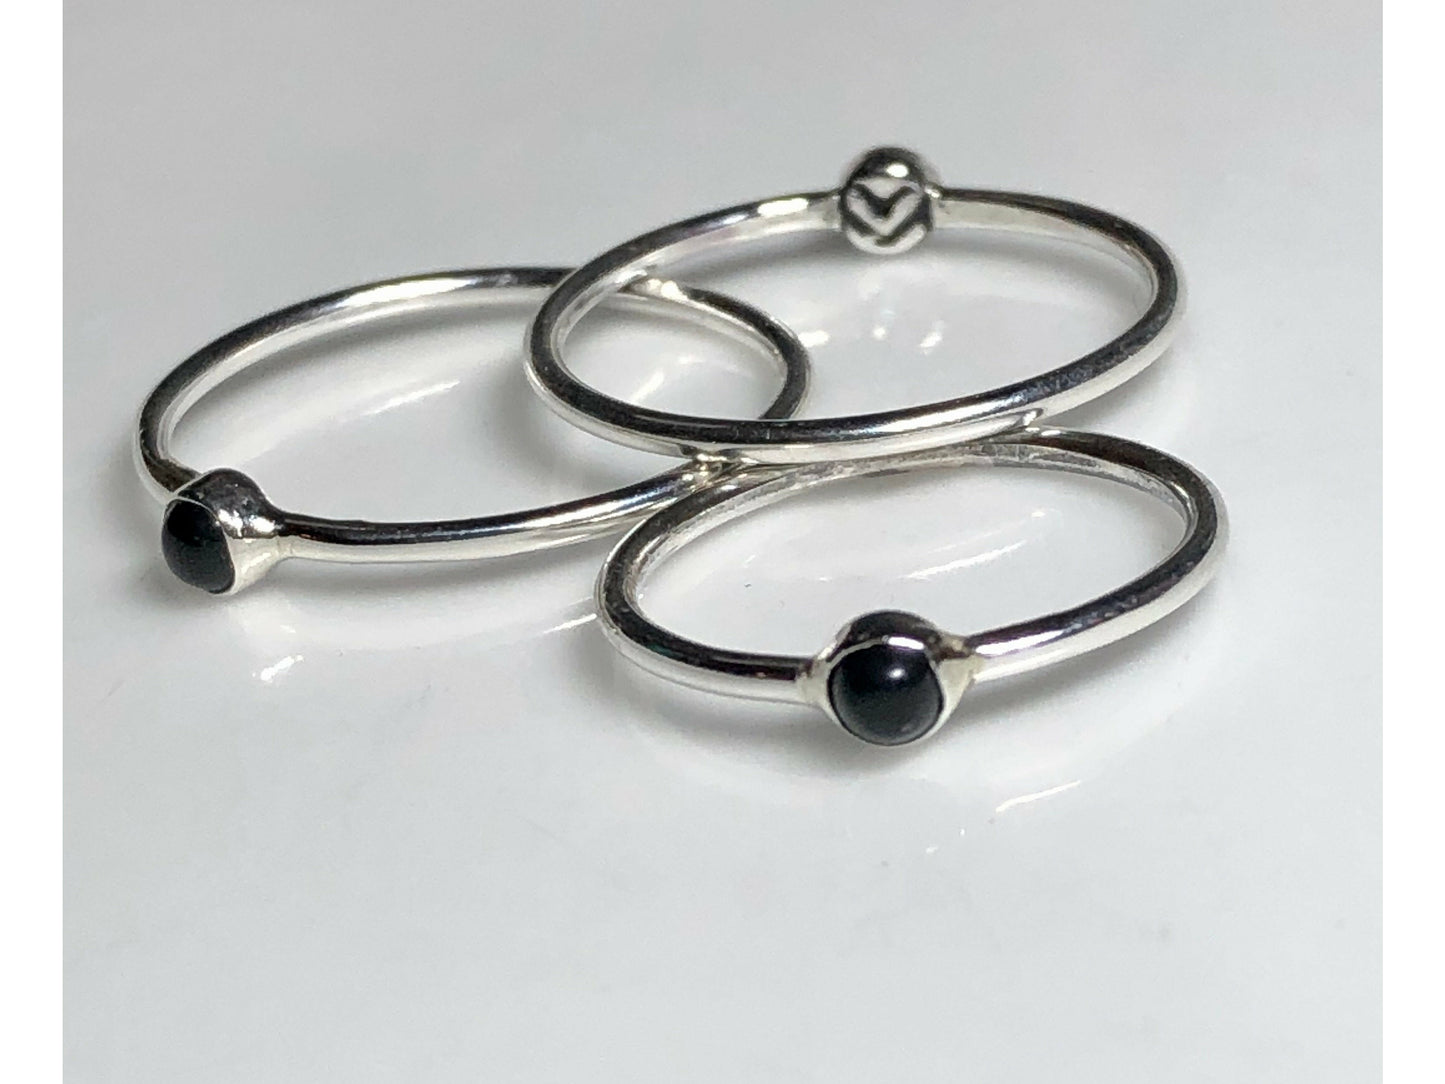 sterling-silver-dainty-rings-silver-stackable-rings-gemstone-jewelry-gifts-for-her-dainty-rings-bridesmaid-gift-modern-jewelry-heart-ring